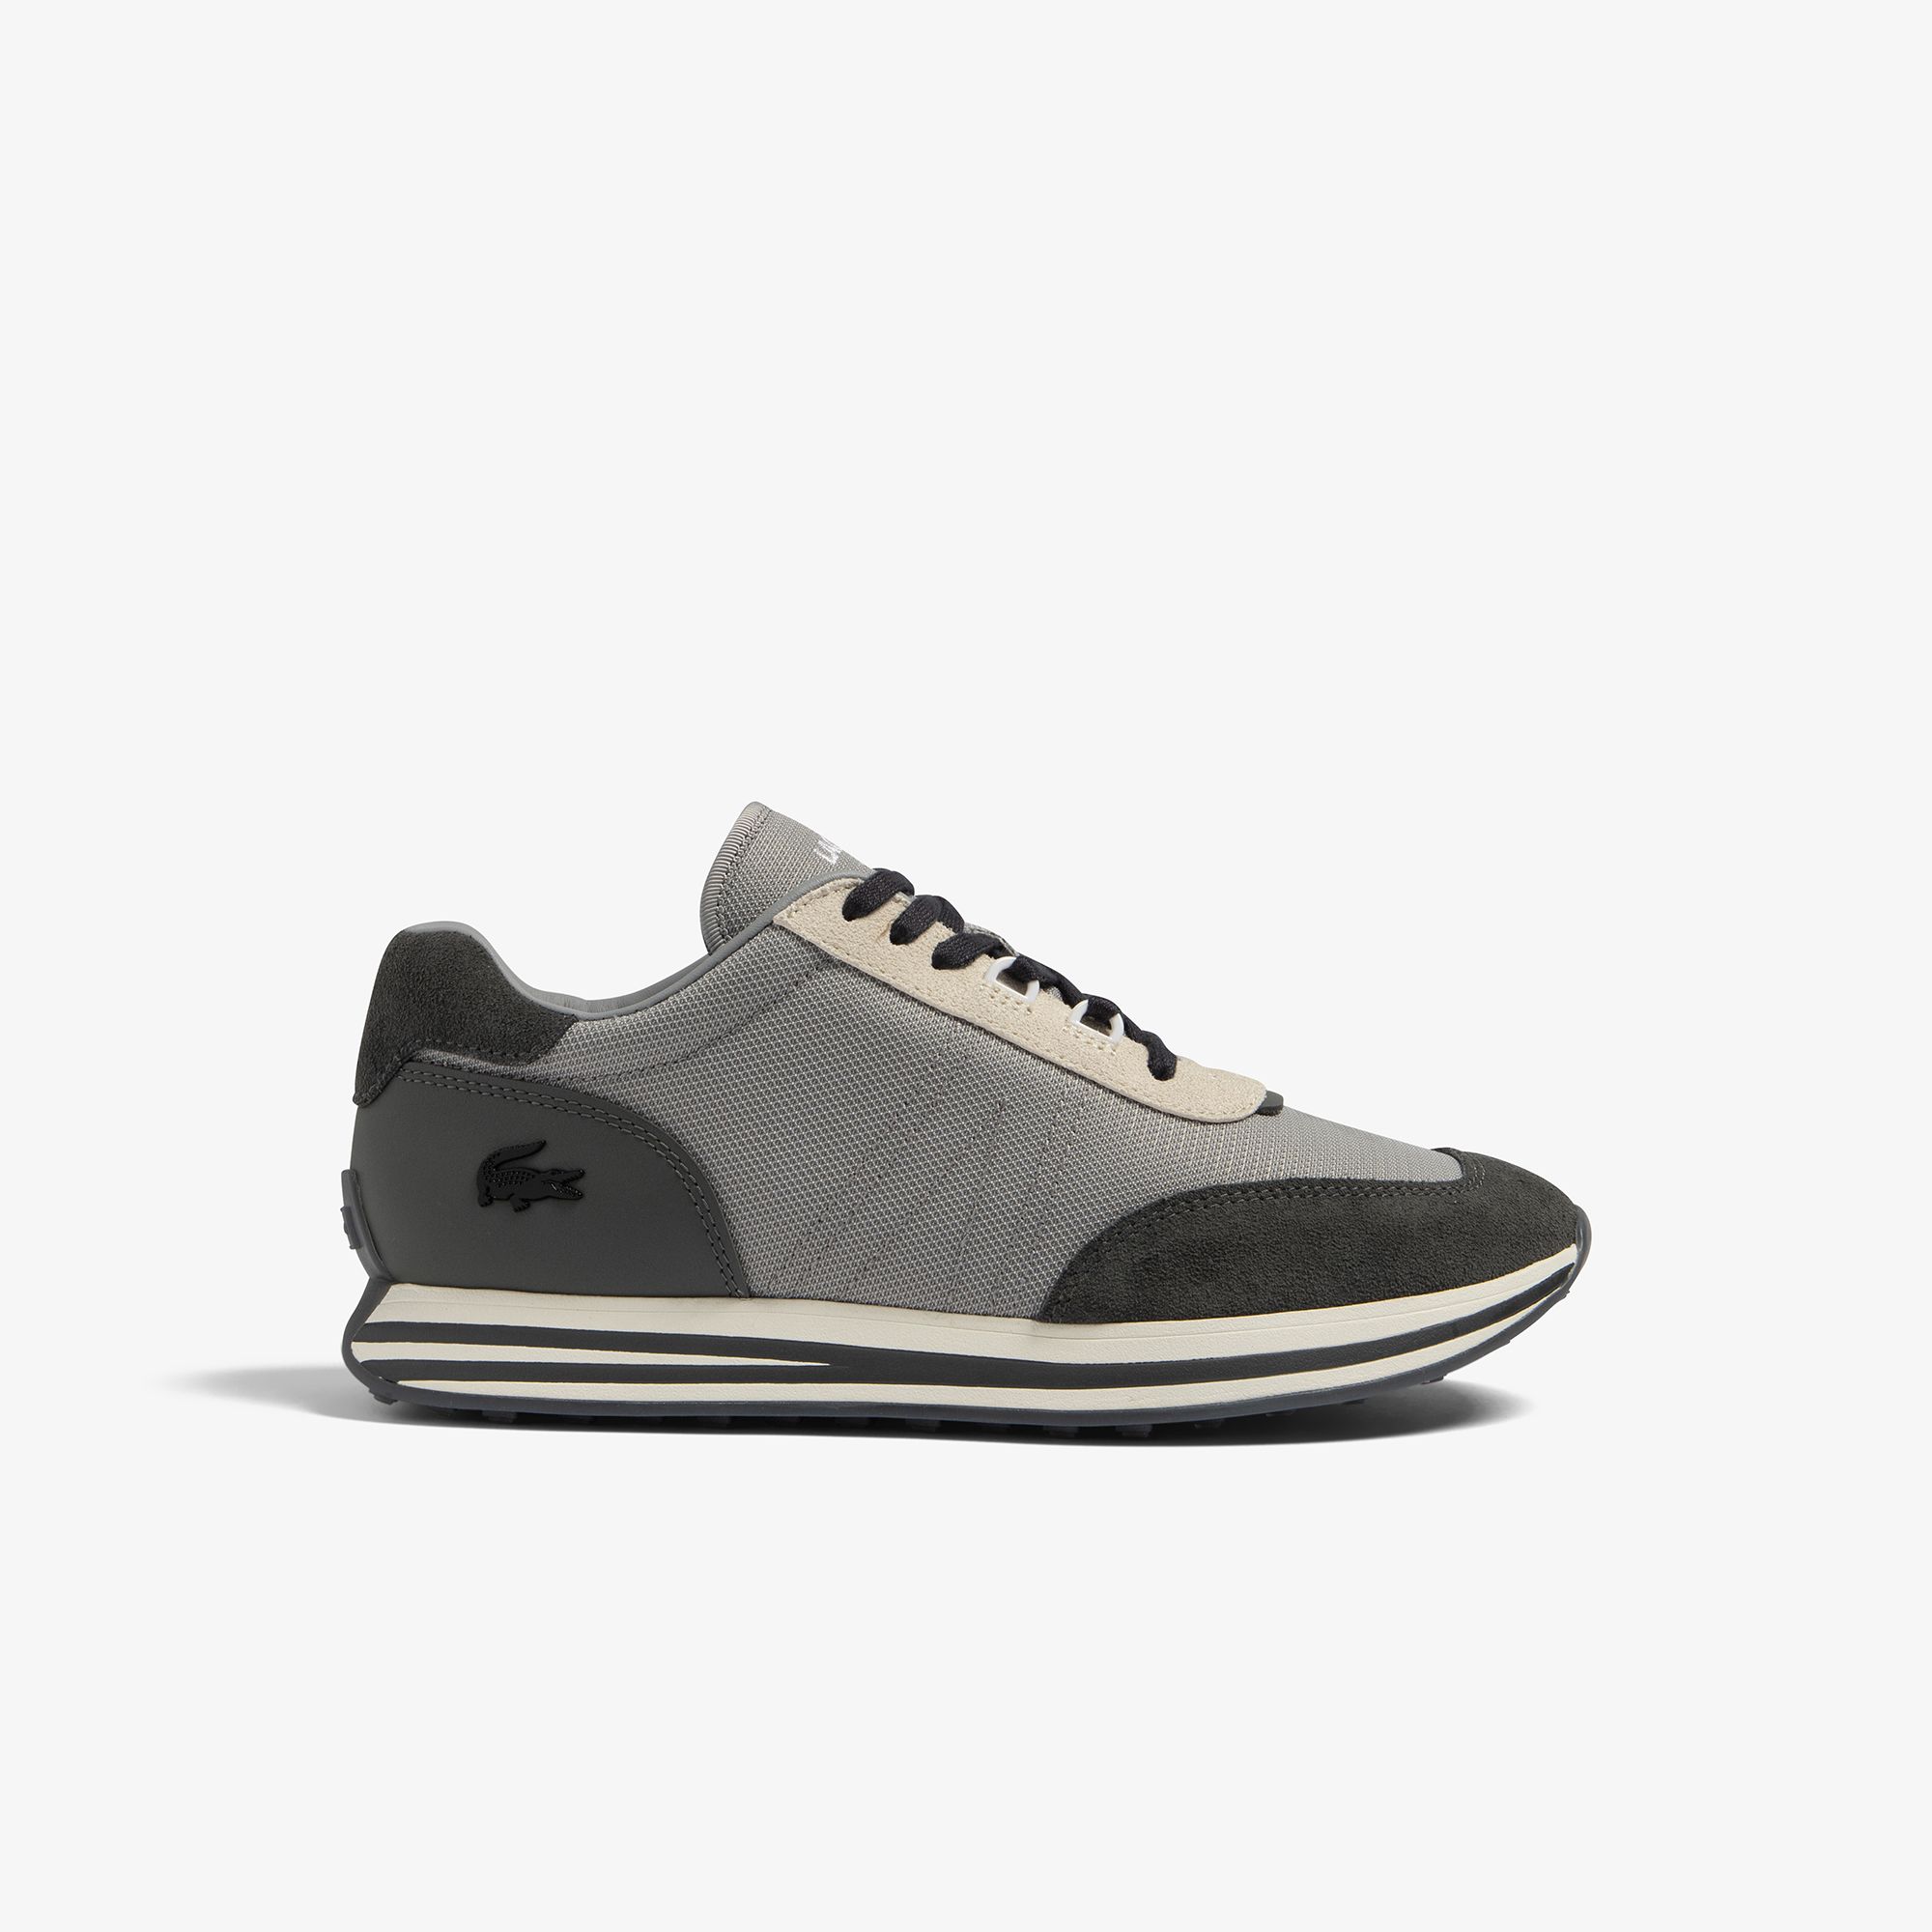 Mens L-Spin Shoes